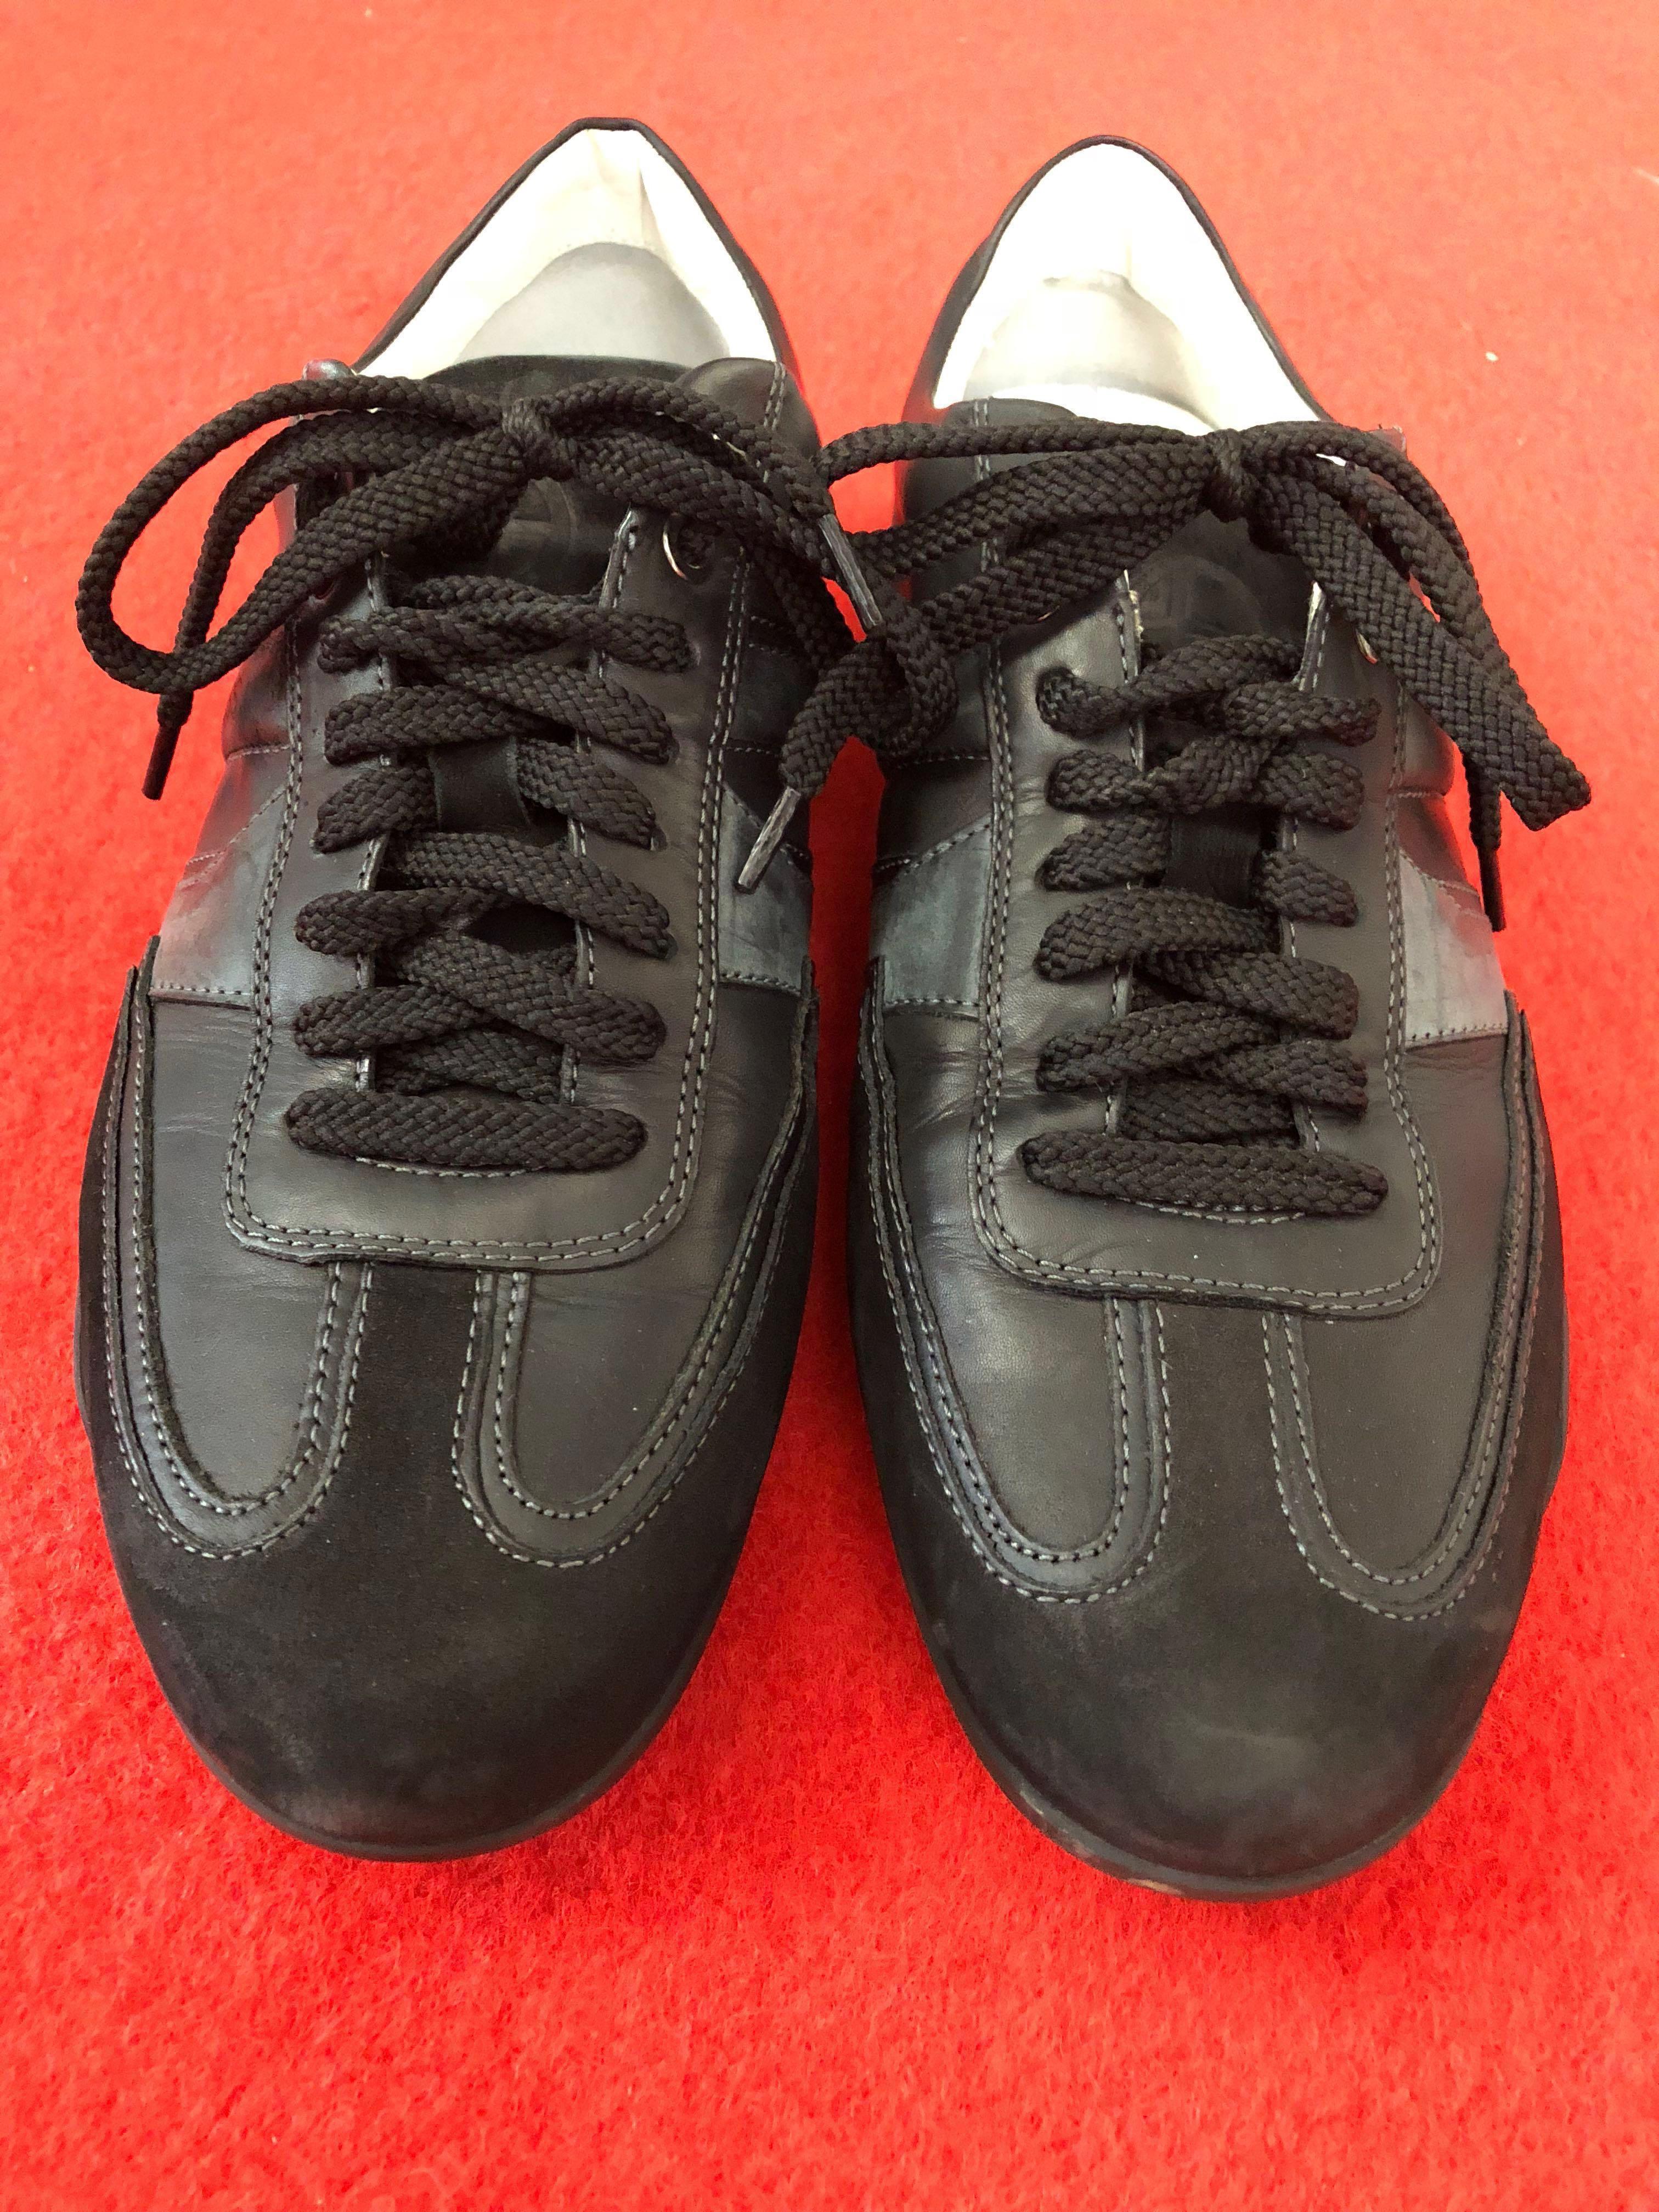 Shoes - Leather/Suede Sneakers 